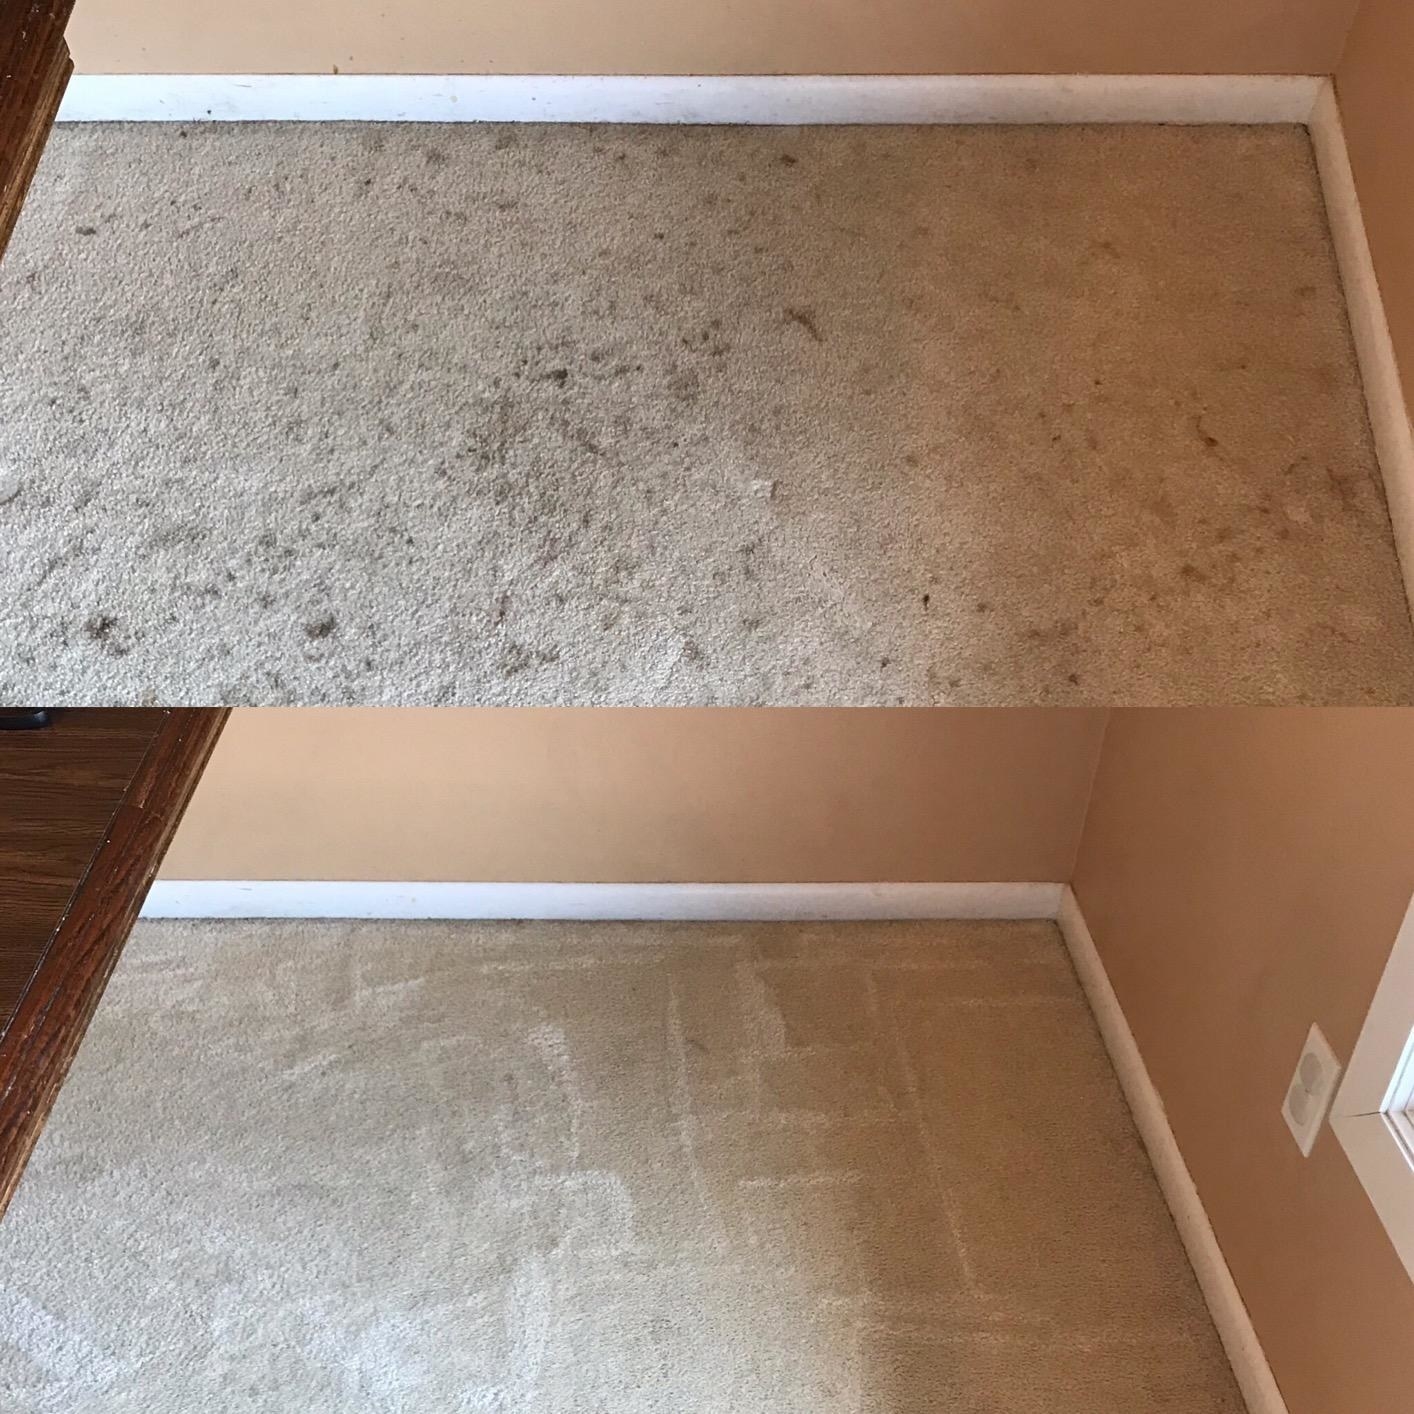 A customer review before photo of their stained carpet and then an after photo showing no more stains.